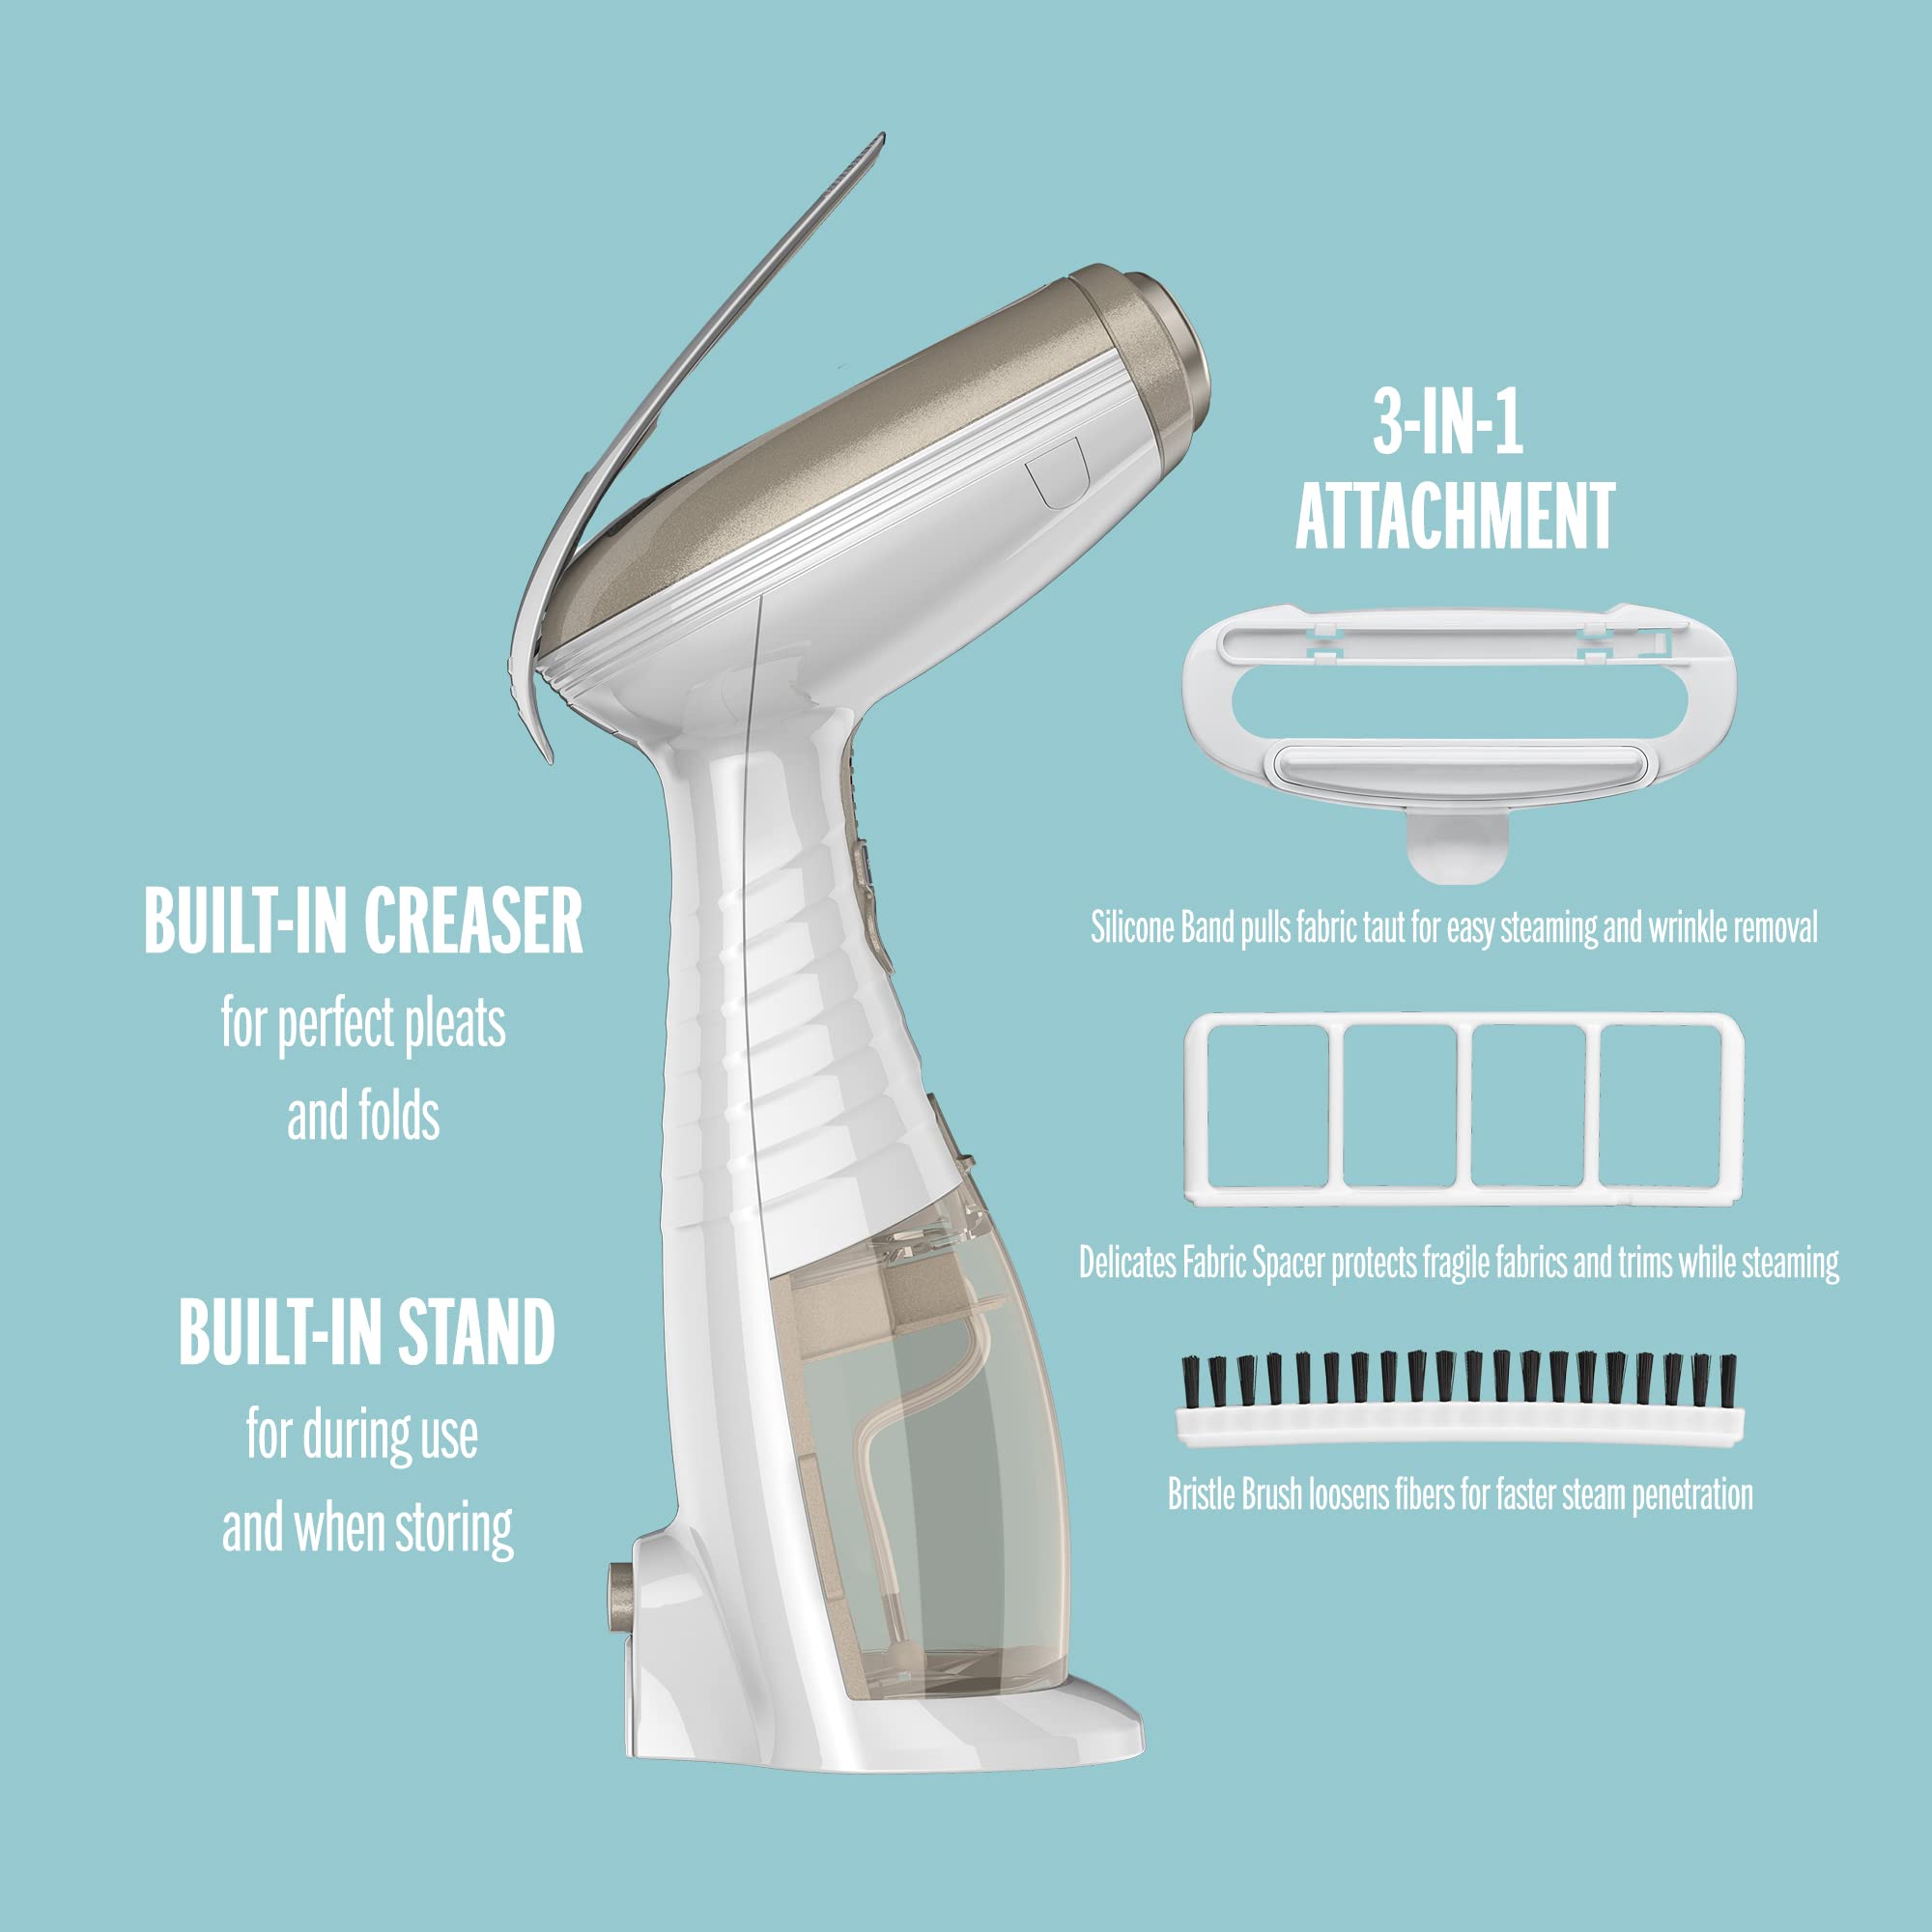 Conair Handheld Garment Steamer for Clothes, Turbo ExtremeSteam 1875W, Portable Handheld Design, Strong Penetrating Steam